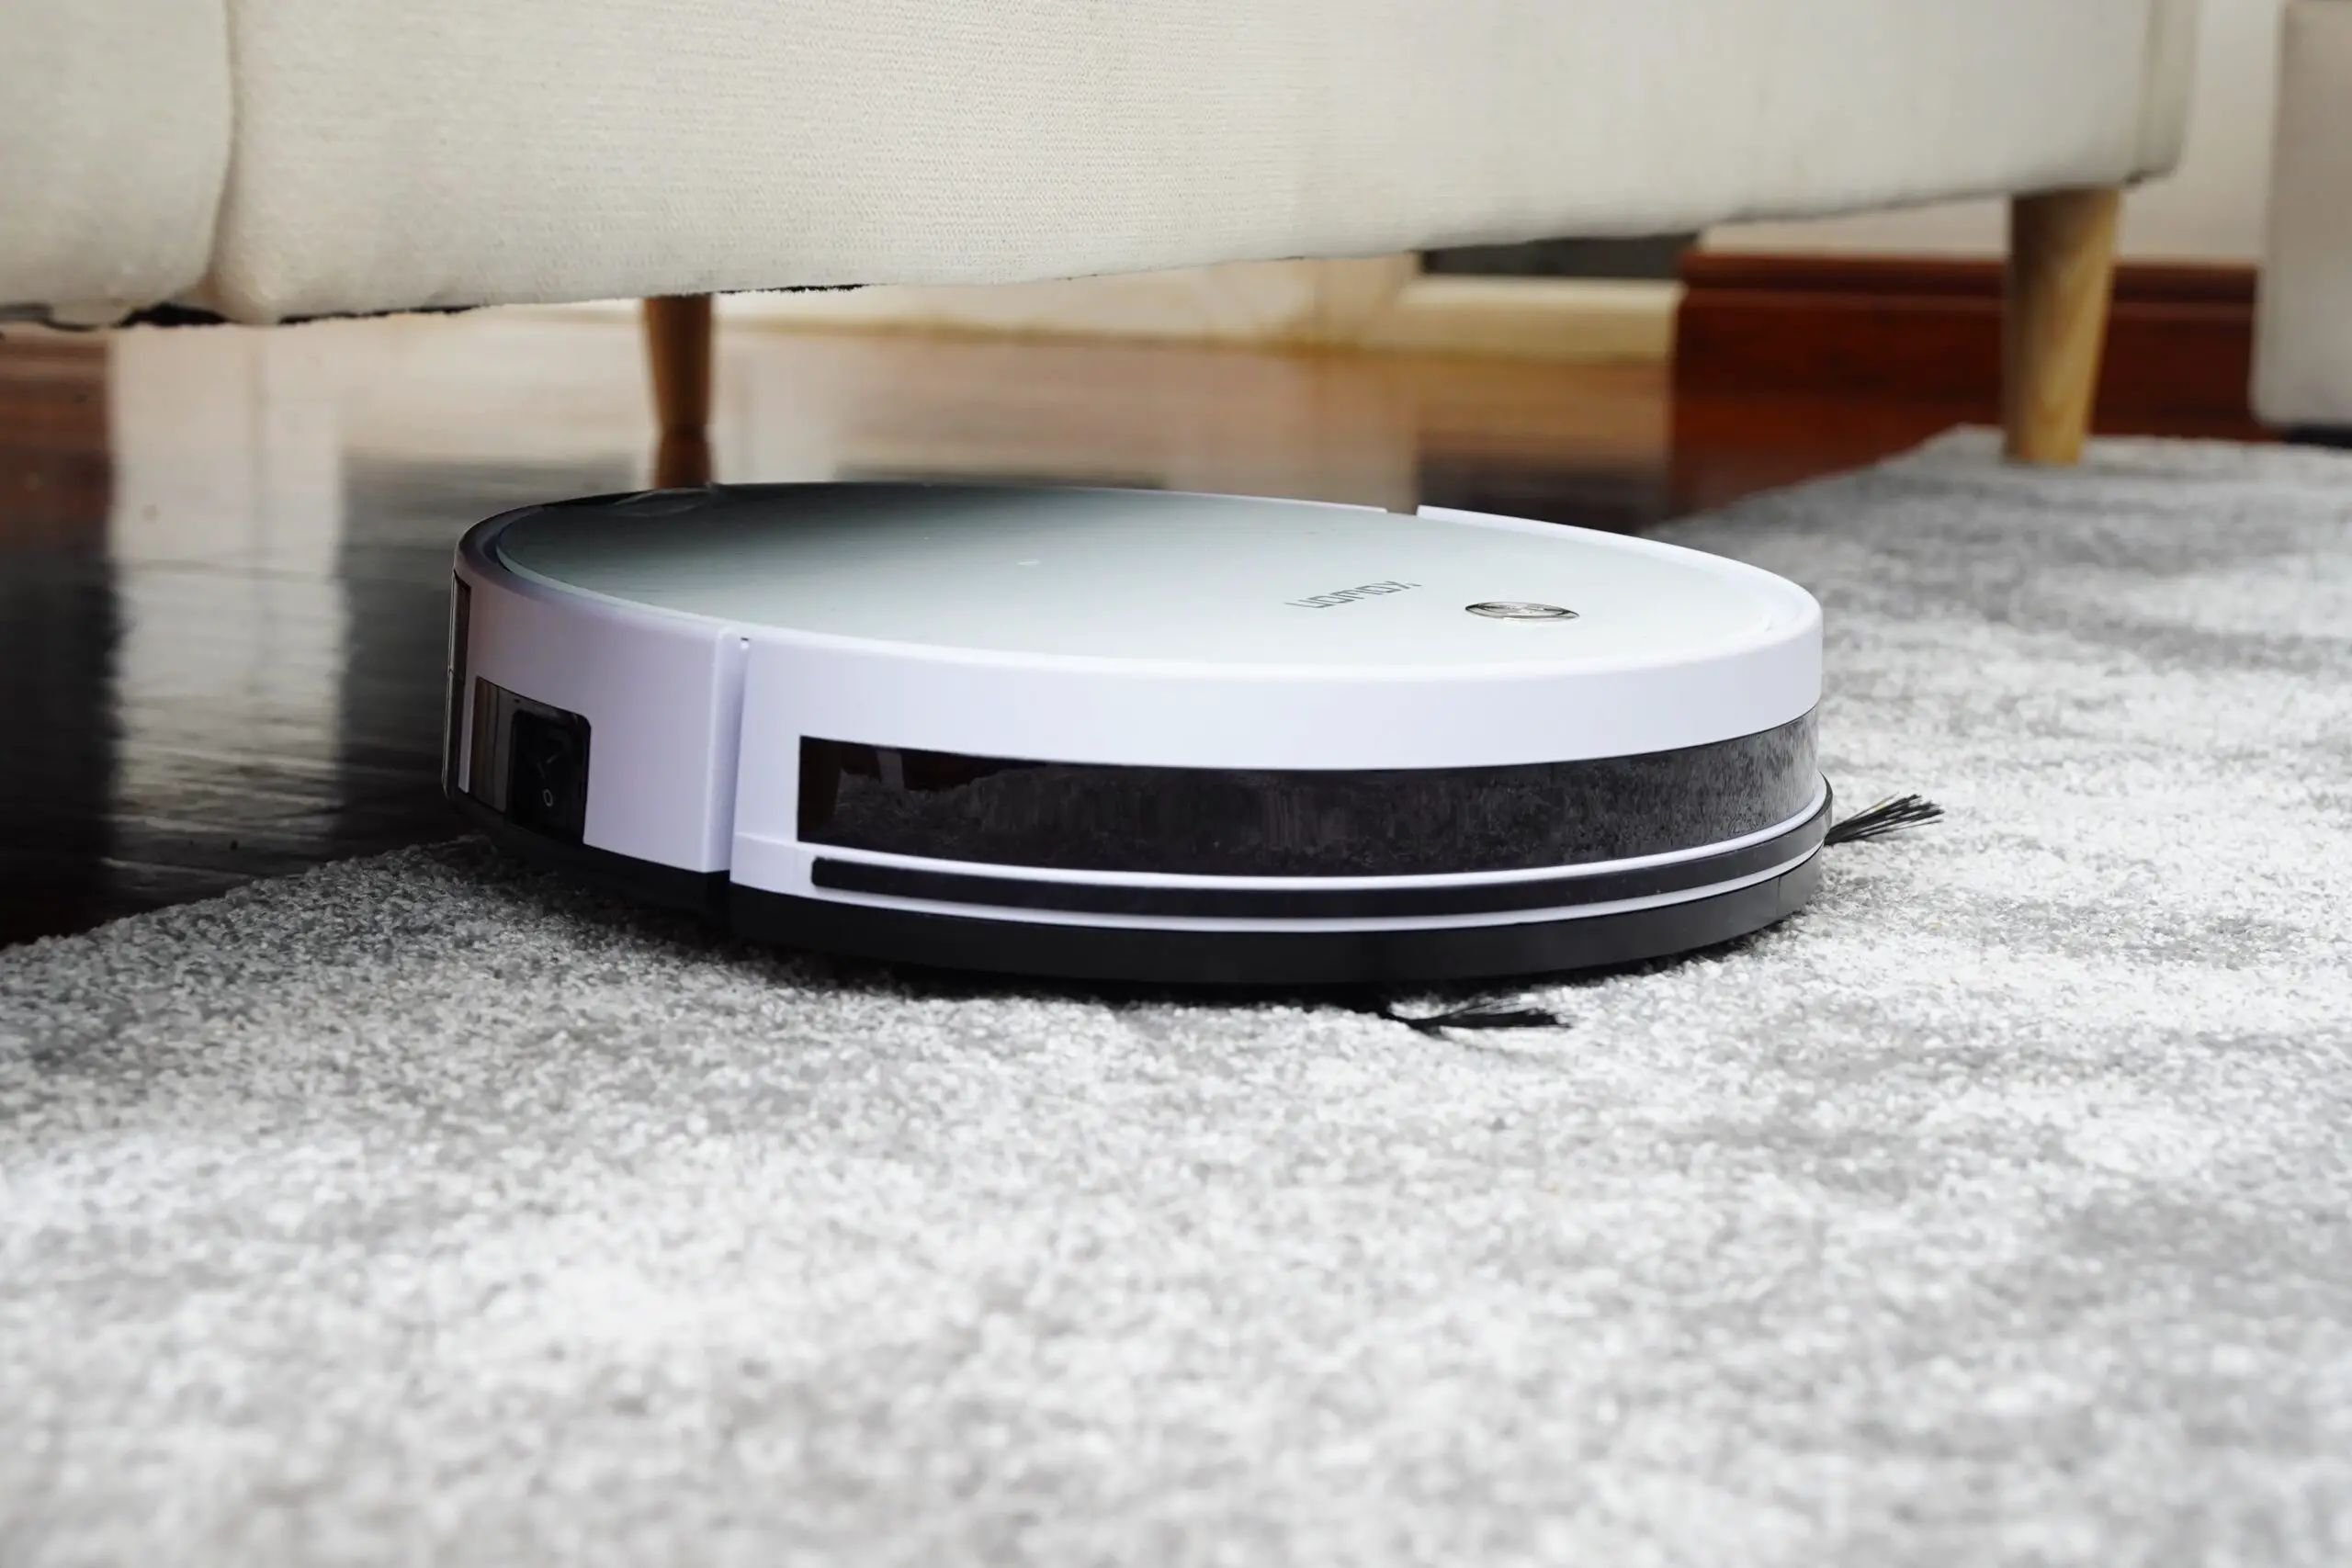 Robot Vacuum Cleaner Buying guide and Review